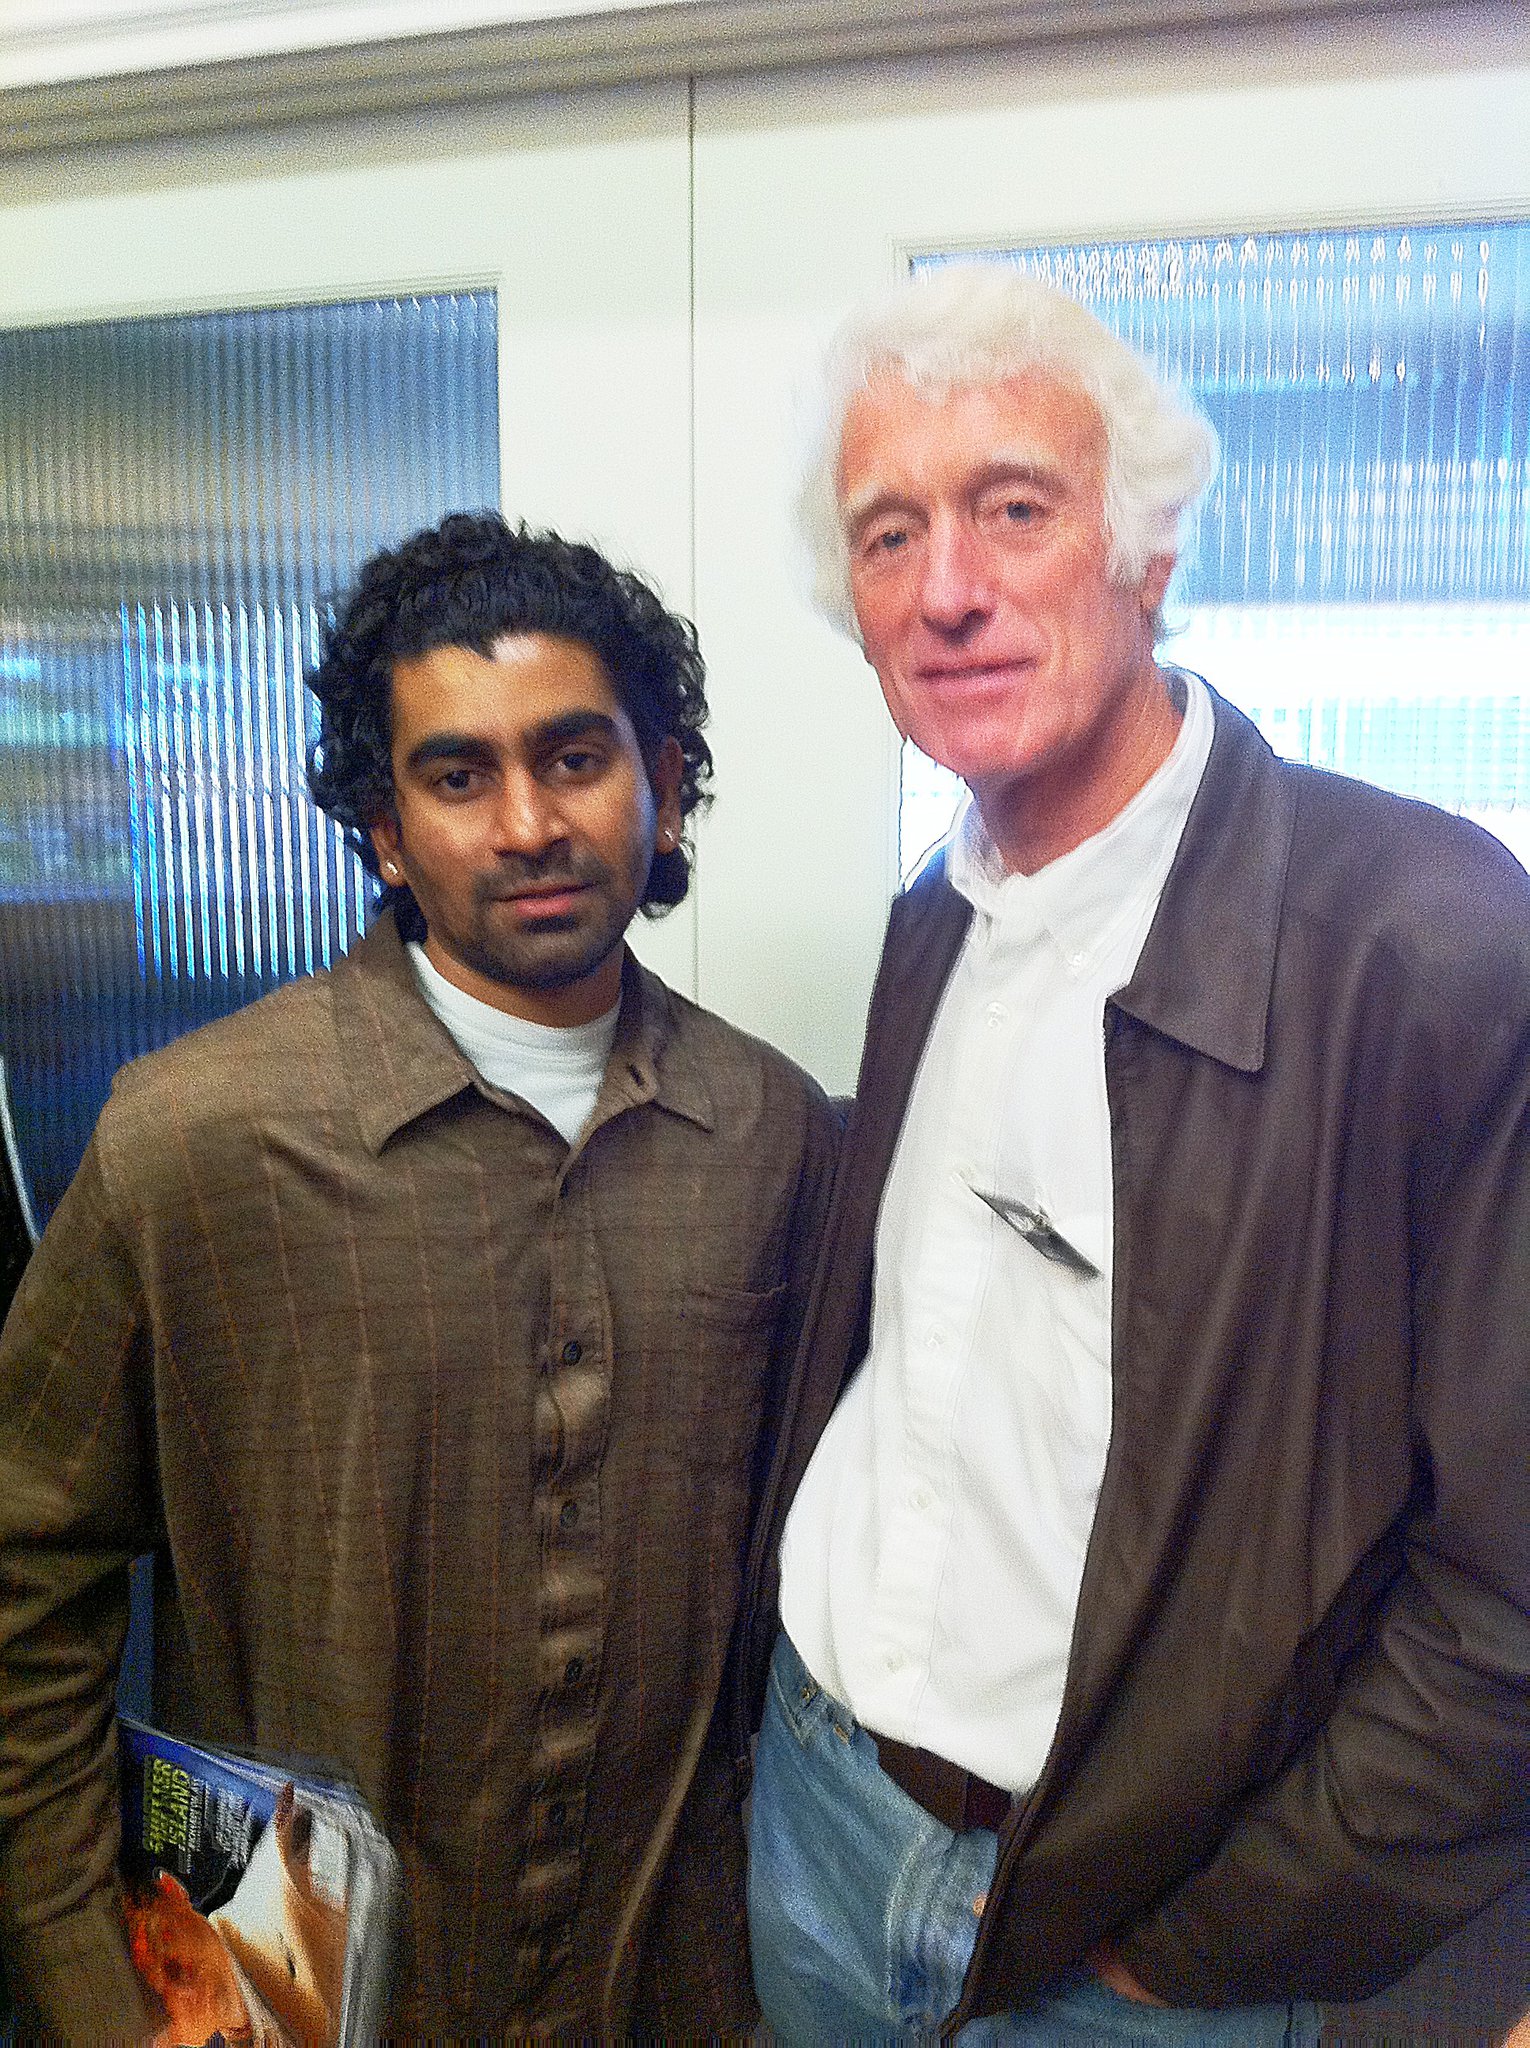 With the MAN, I have always wanted to meet, Roger Deakins, ASC, BSC